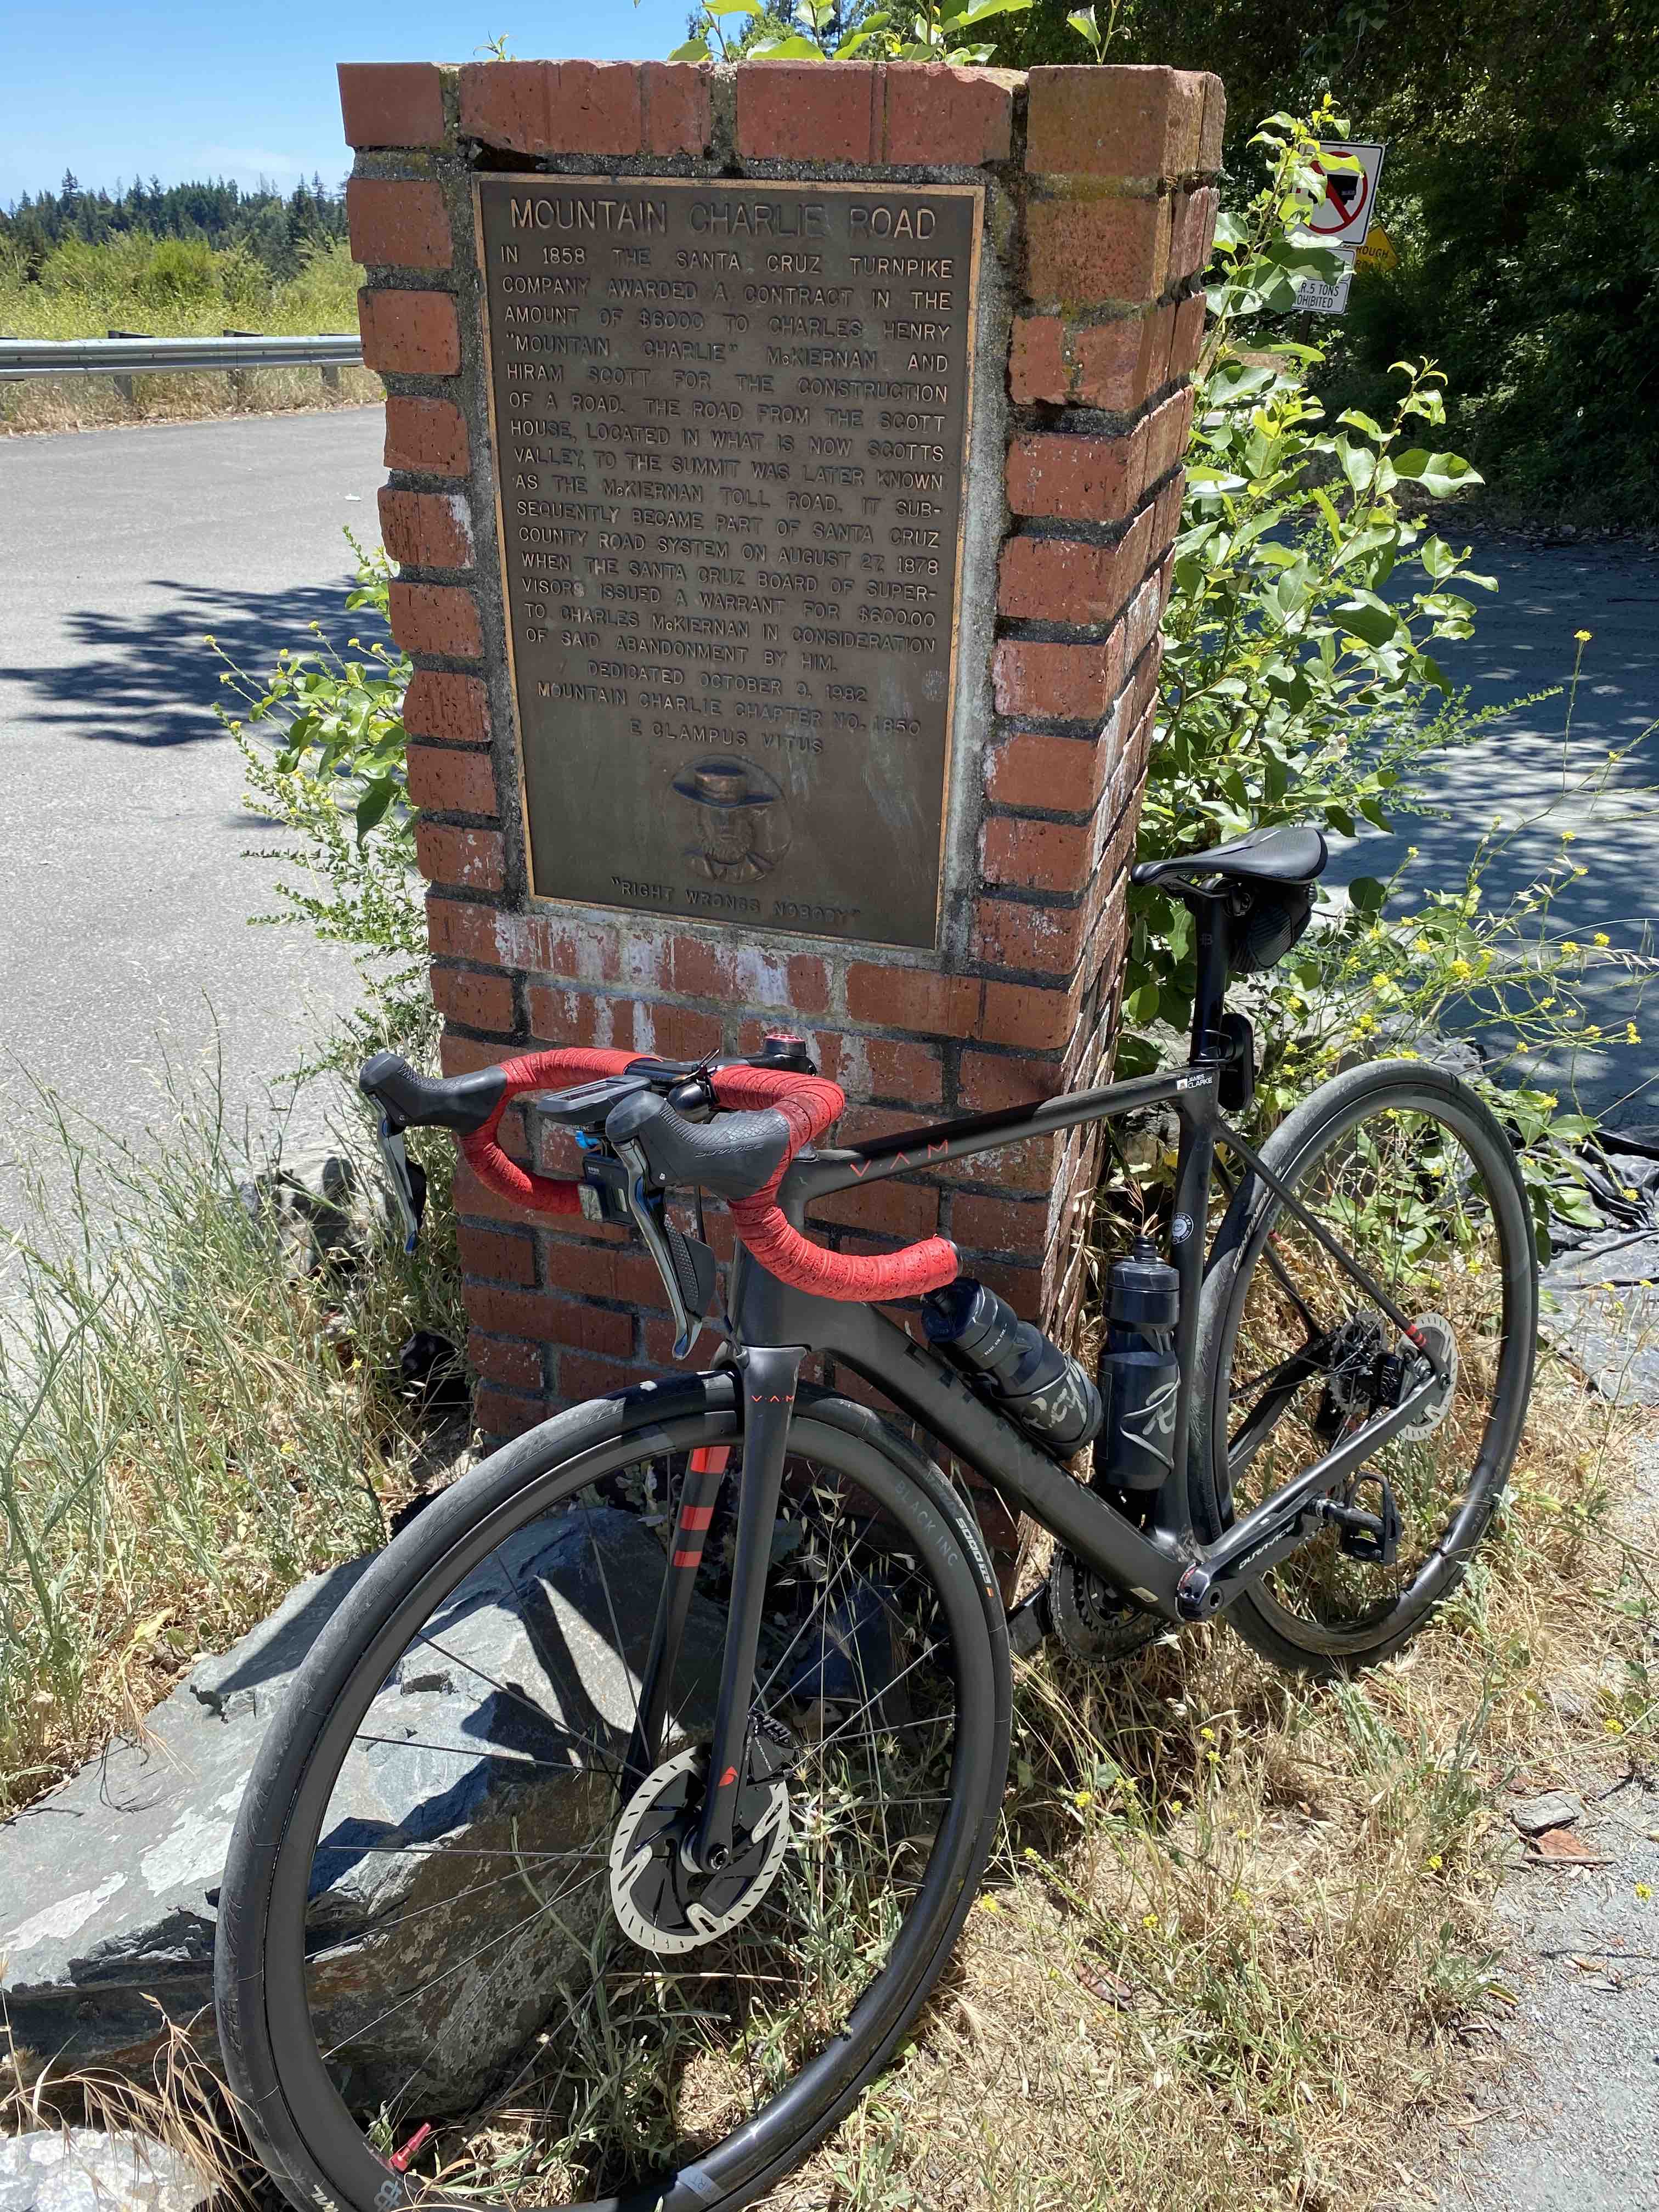 Bicycle posed against brick road marker for Mountain Charlie Road in the Santa Cruz mountains